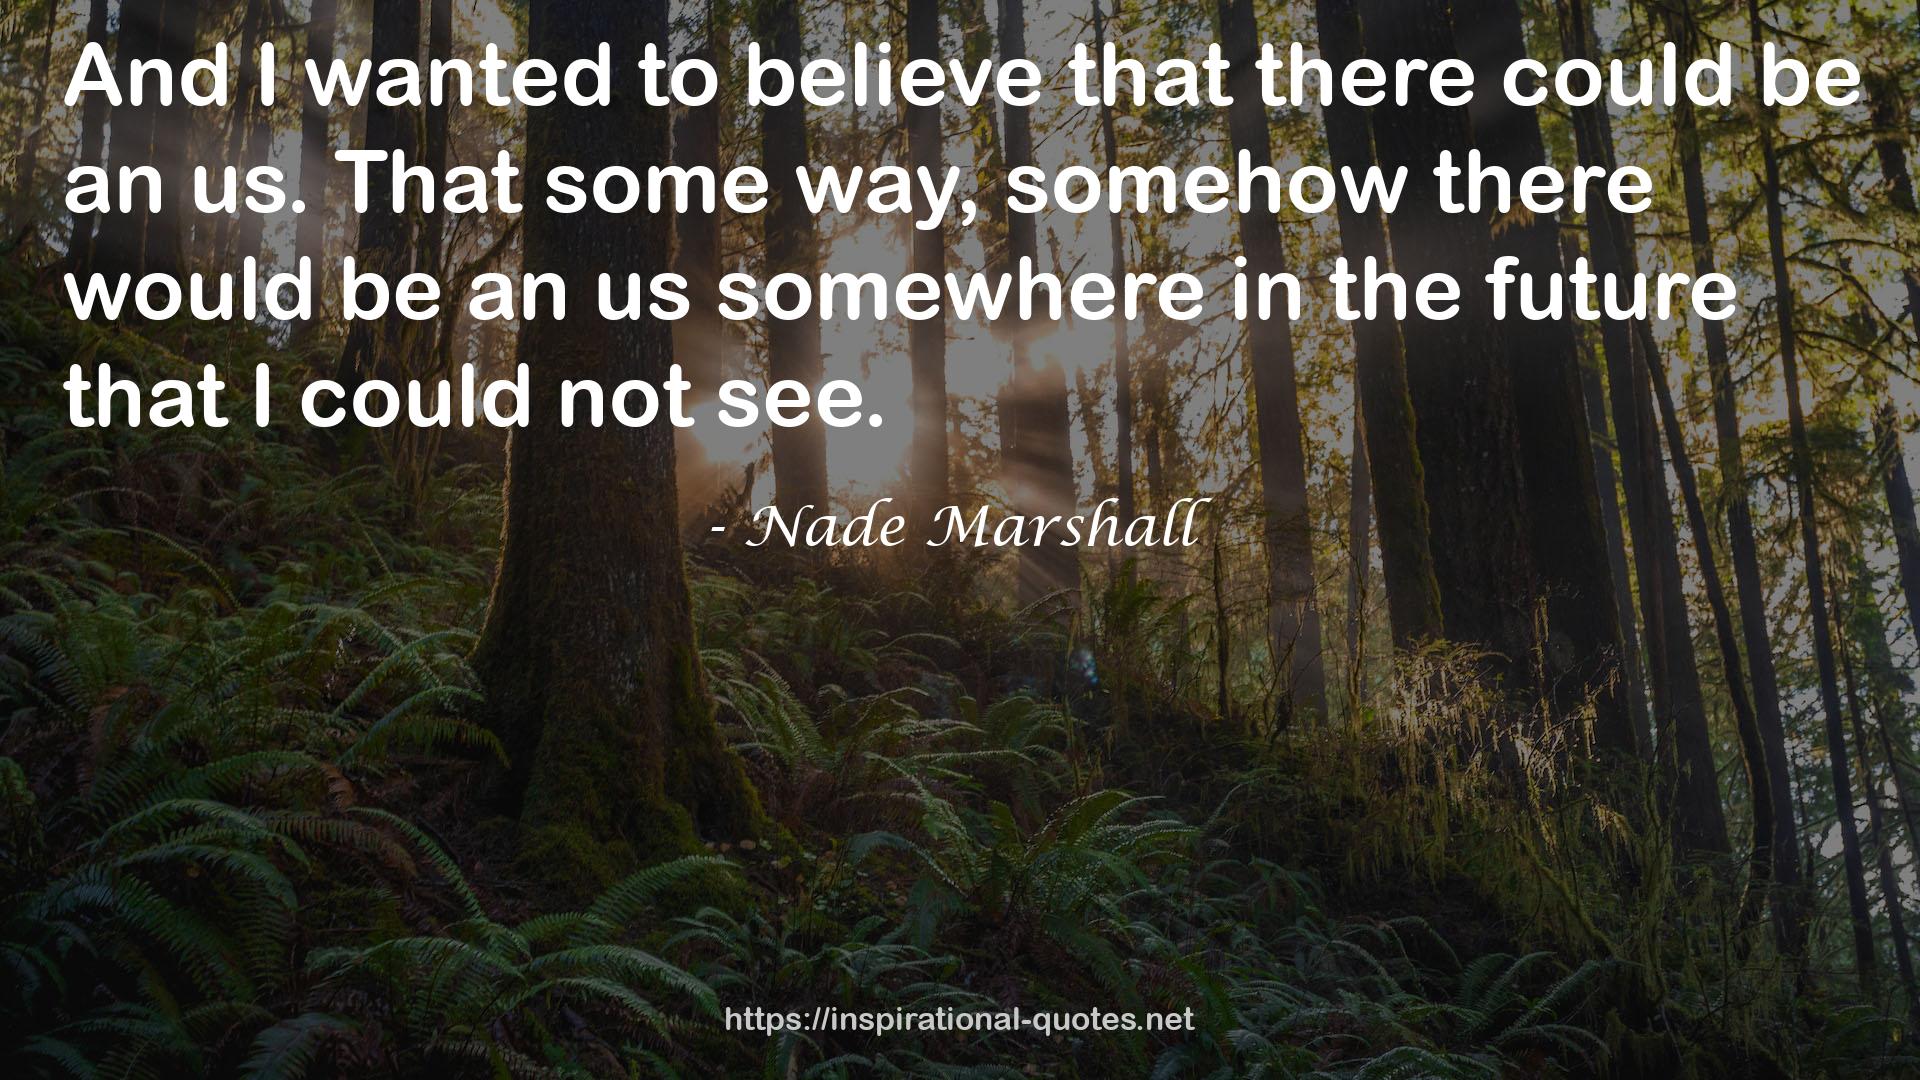 Nade Marshall QUOTES